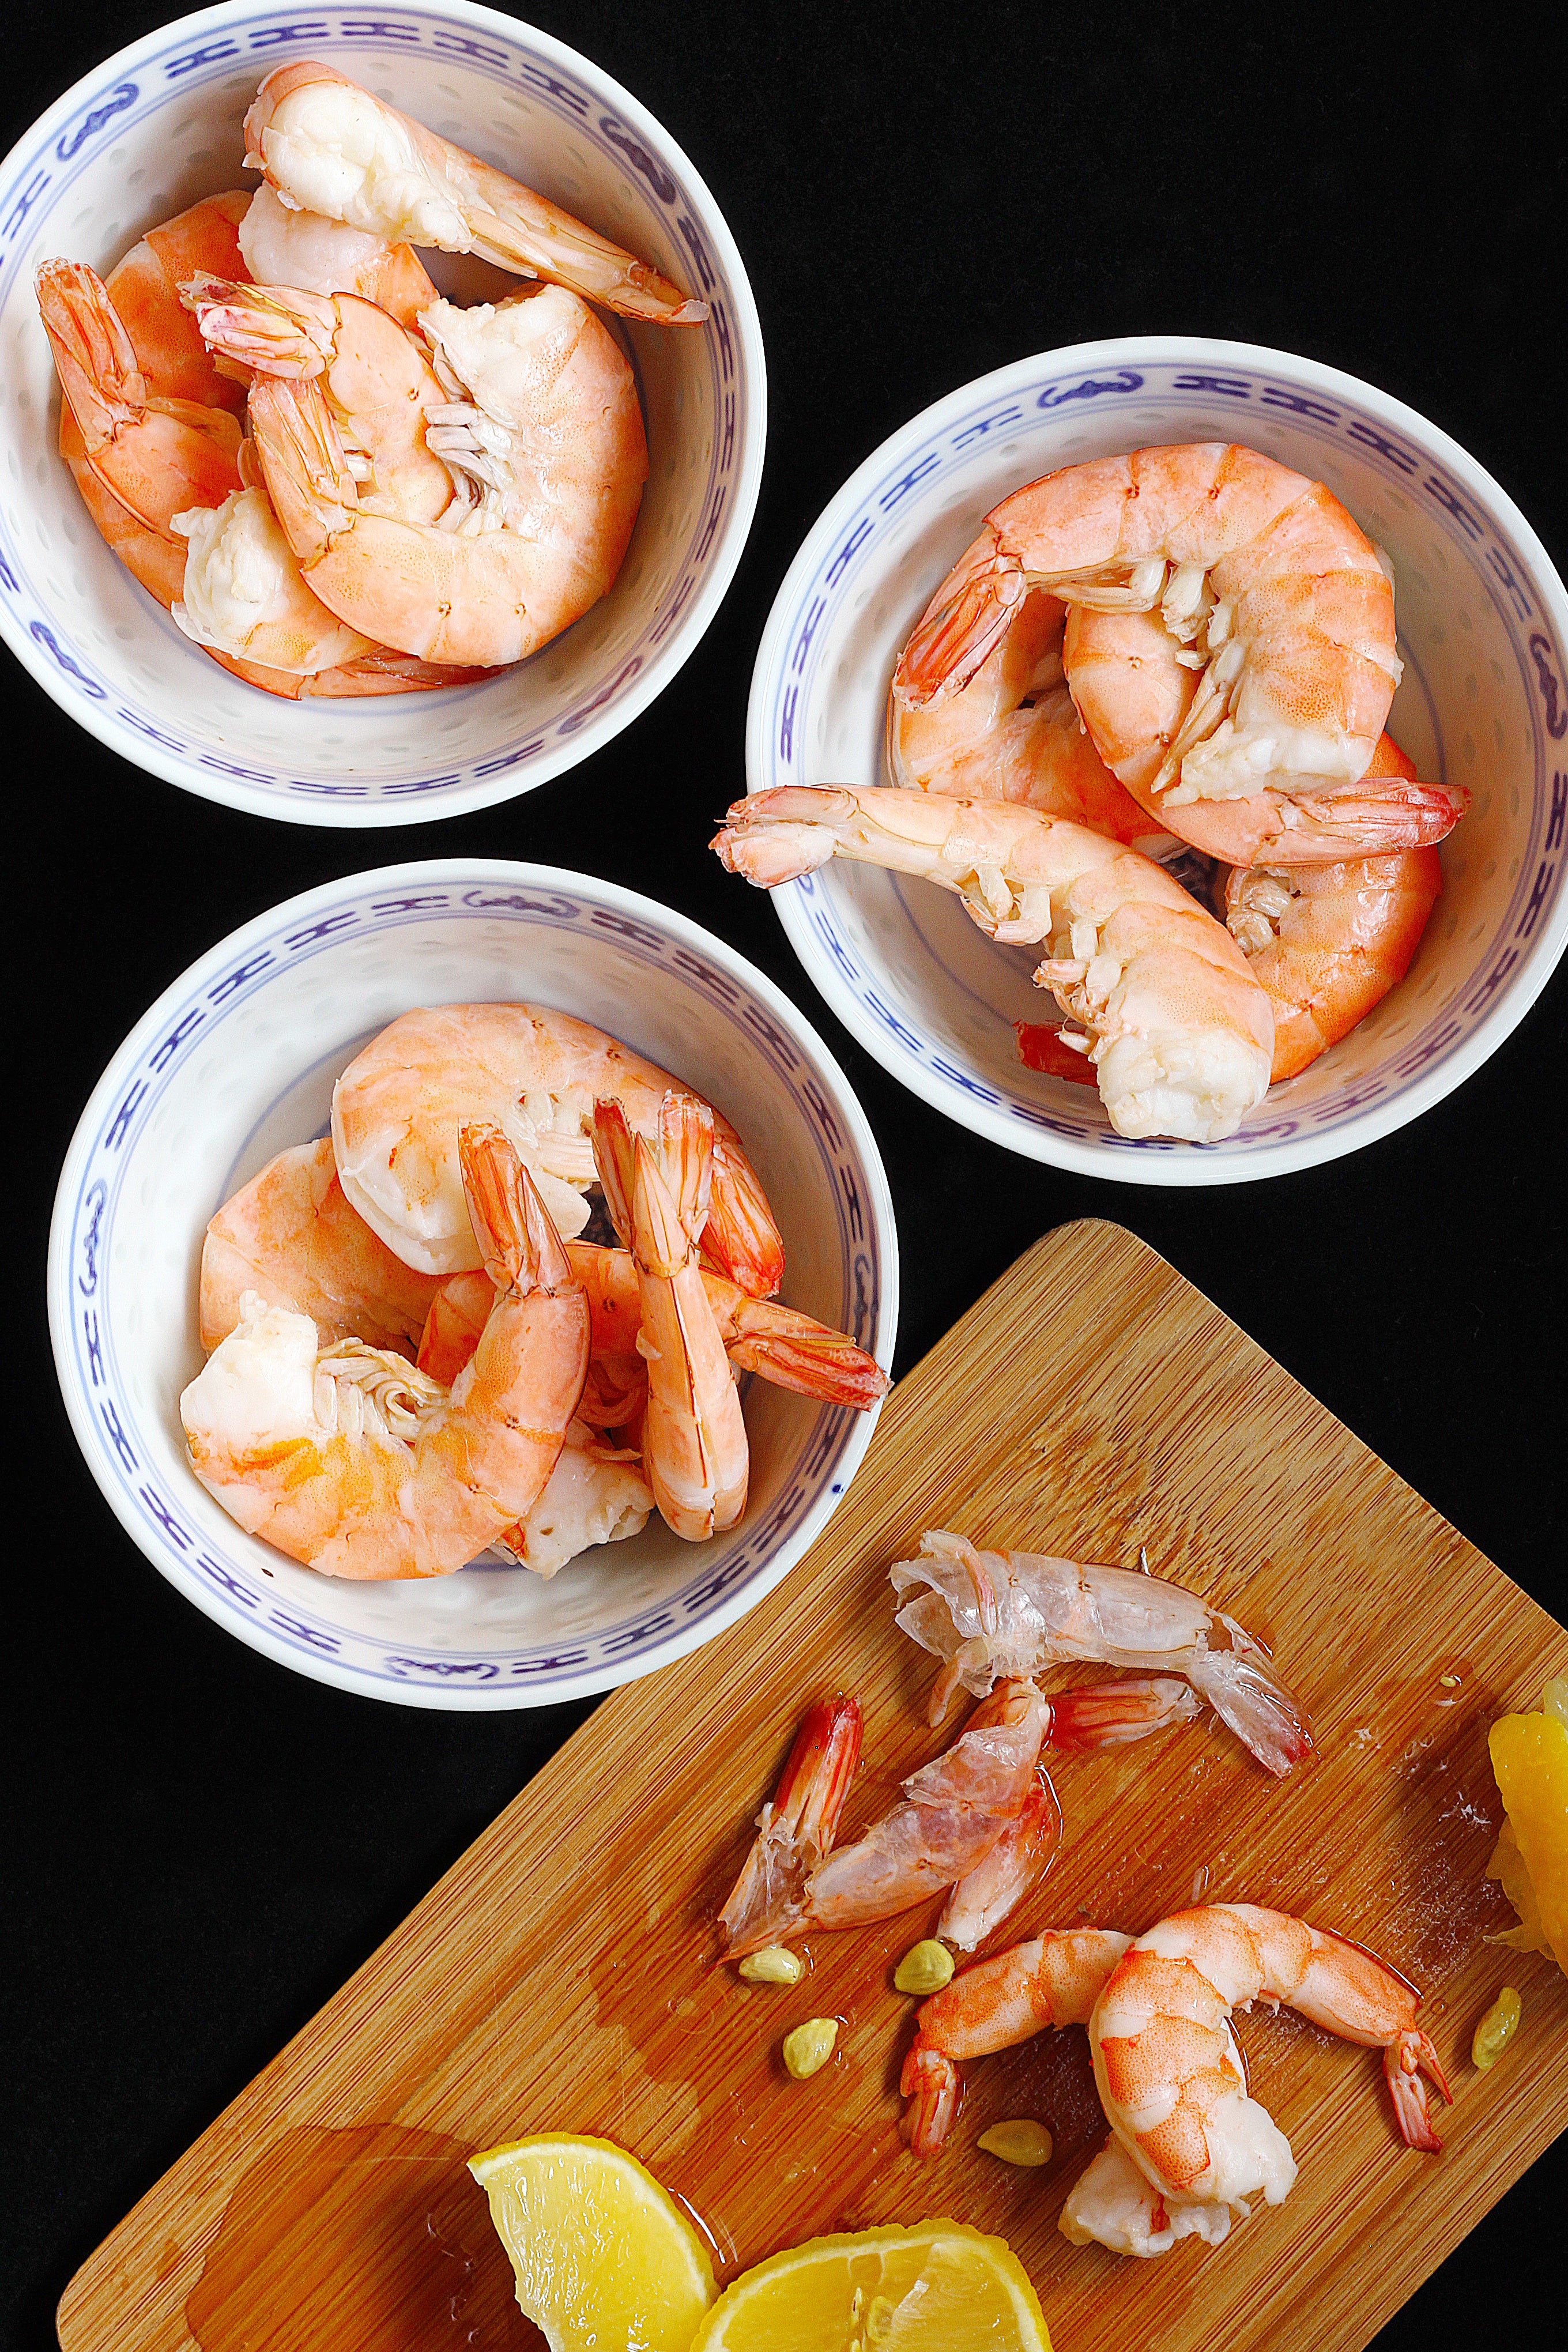 cooked-shrimp-dressed-with-lemon-juice-in-china-bowls.jpg